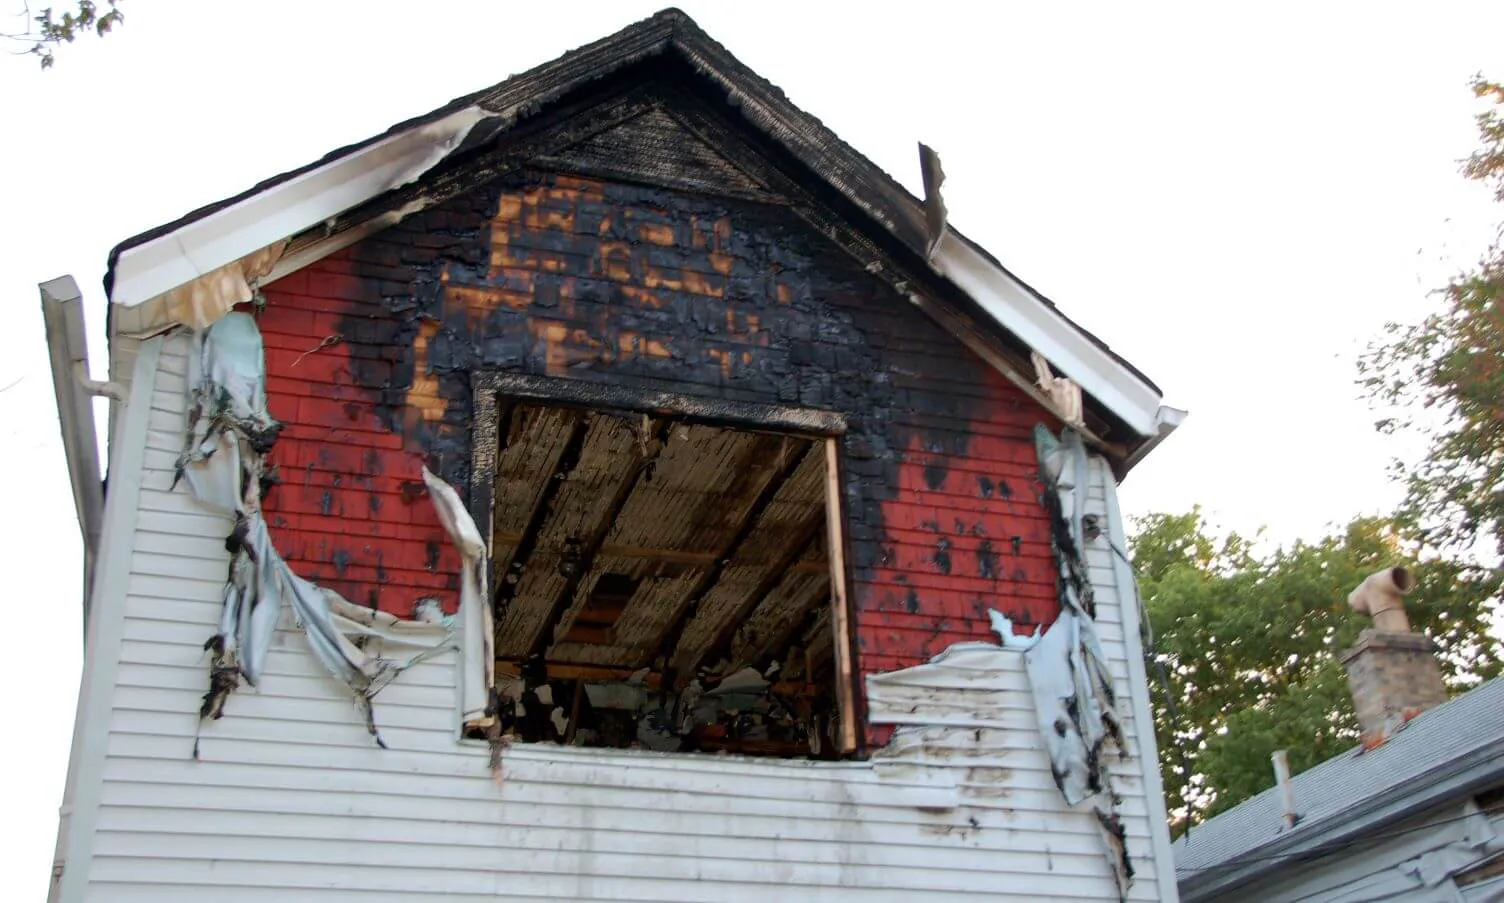 A shot of a dormer of a Floridian house with fire and smoke damage and peeled off paint.